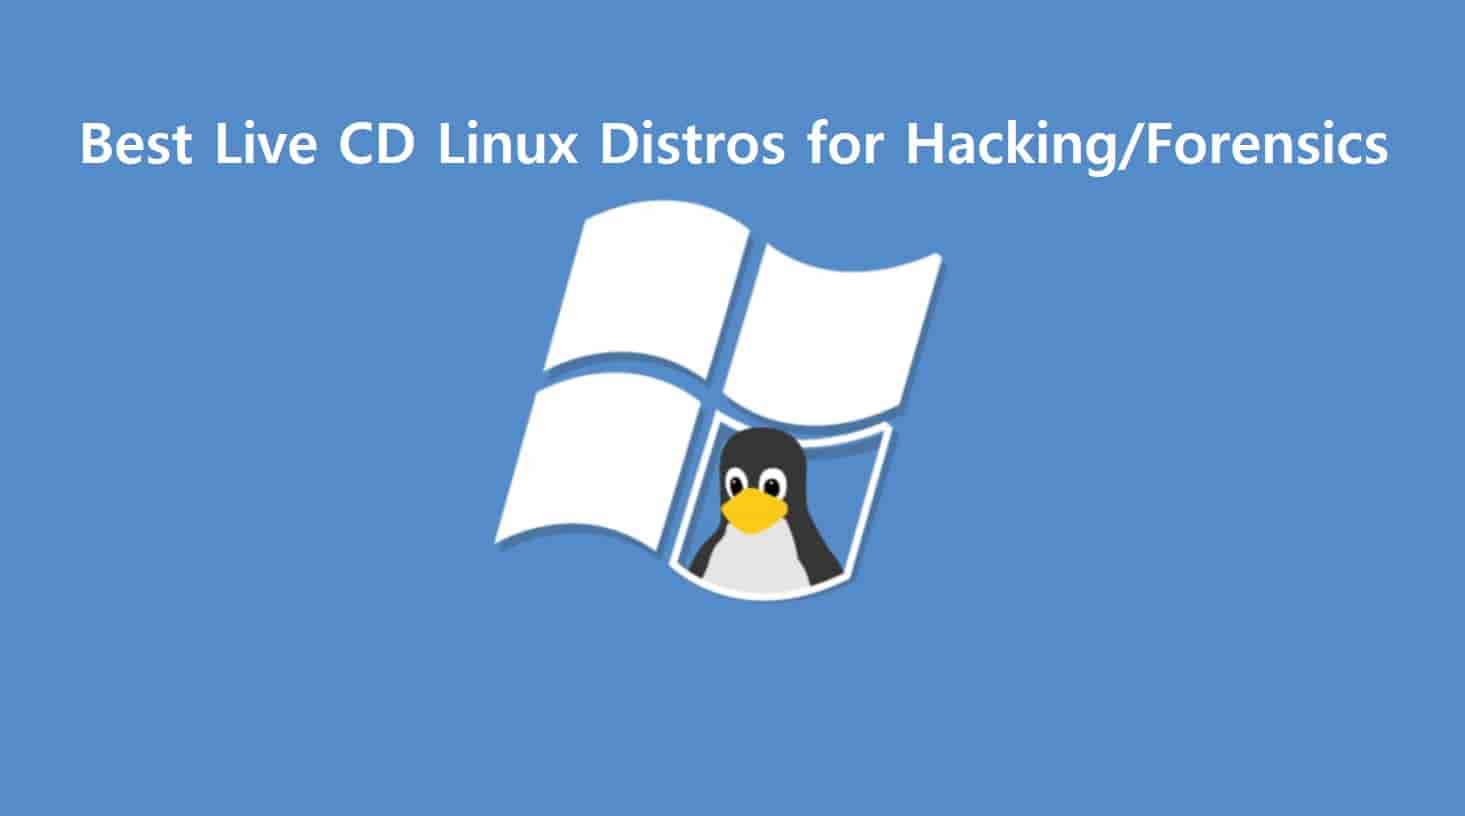 11 Best Linux Live Security CD Distros for PenTest, Forensics & Hacking 2022